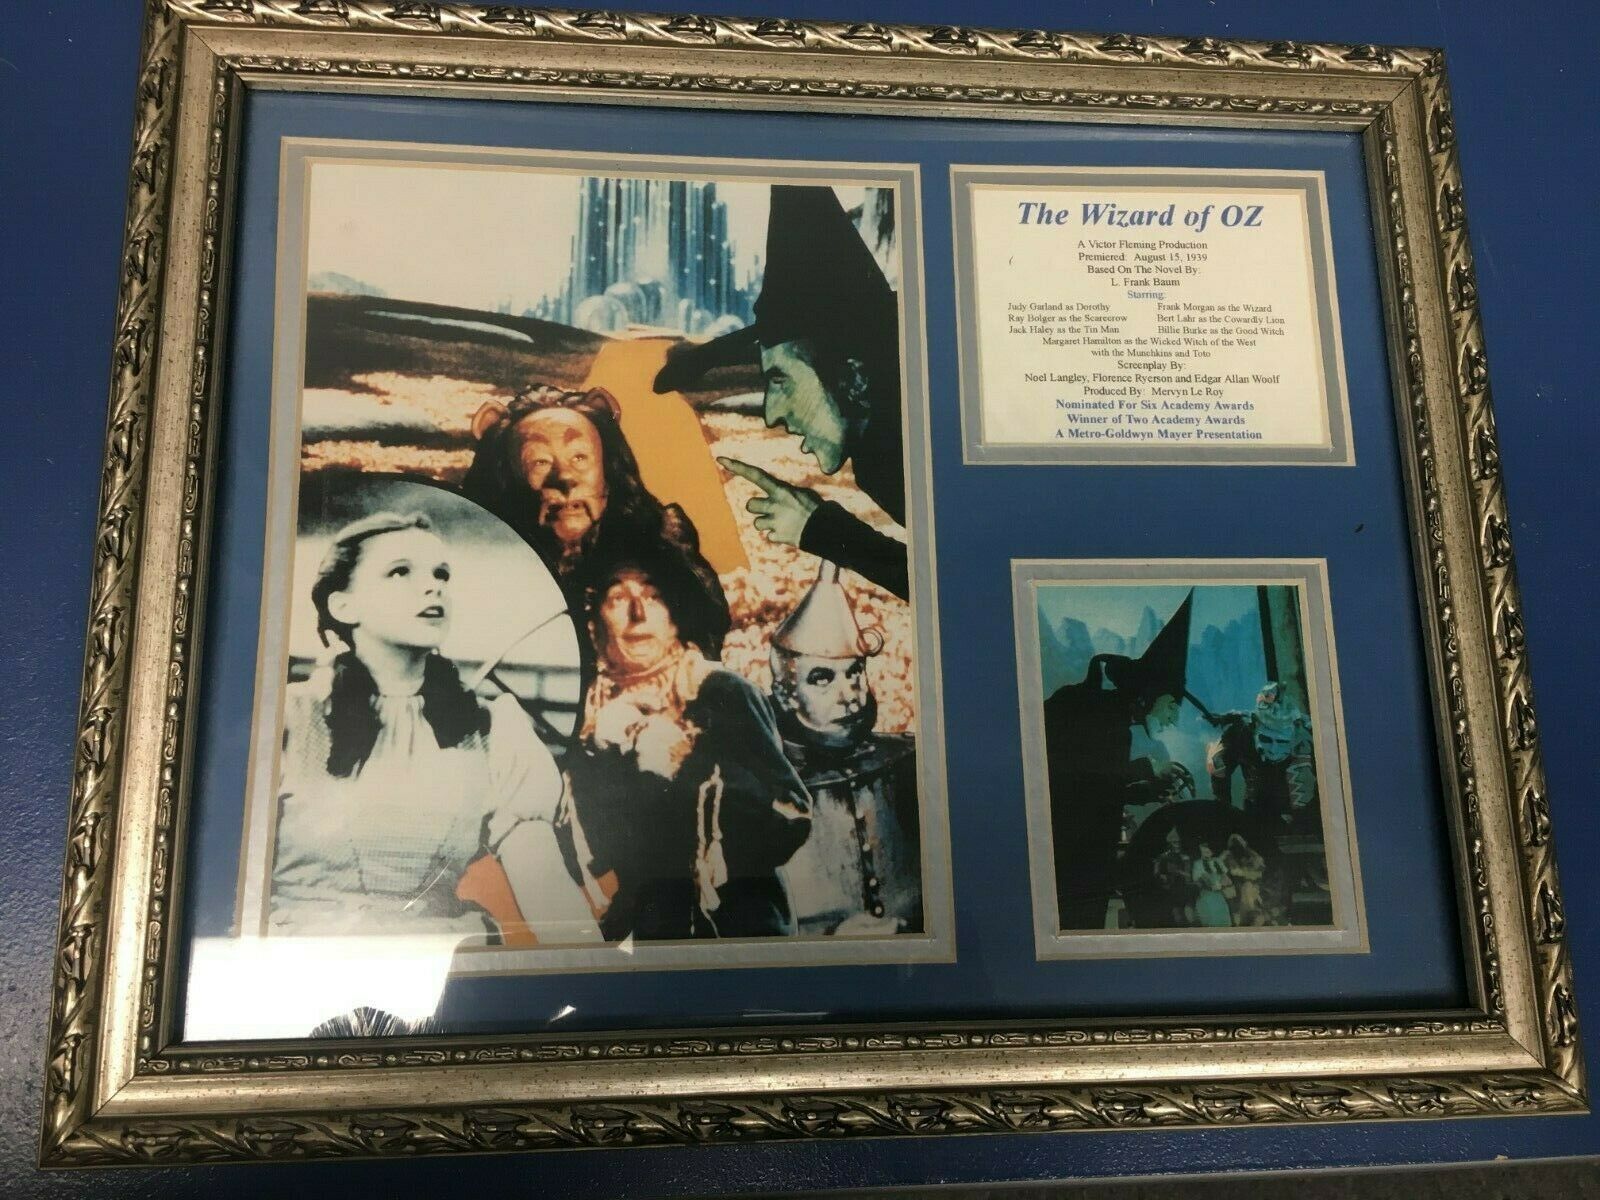 "The Wizard Of Oz" Matted Photo Collage Framed - $45.53